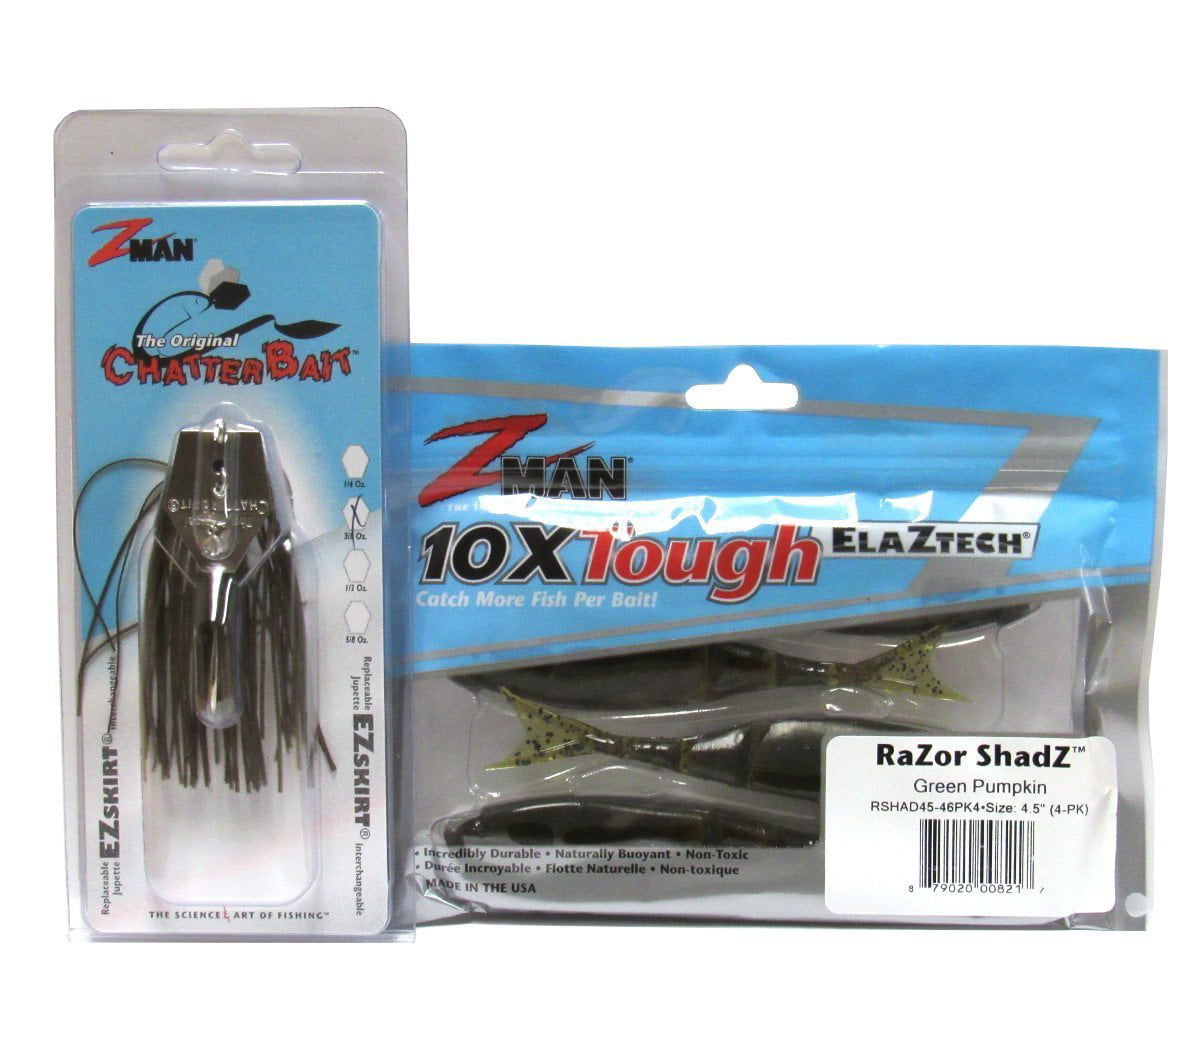 Chatterbait Kit - Z-Man 3/8oz Chatterbait + Z-Man Razor ShadZ + How to Fish  the Chatterbait Guide